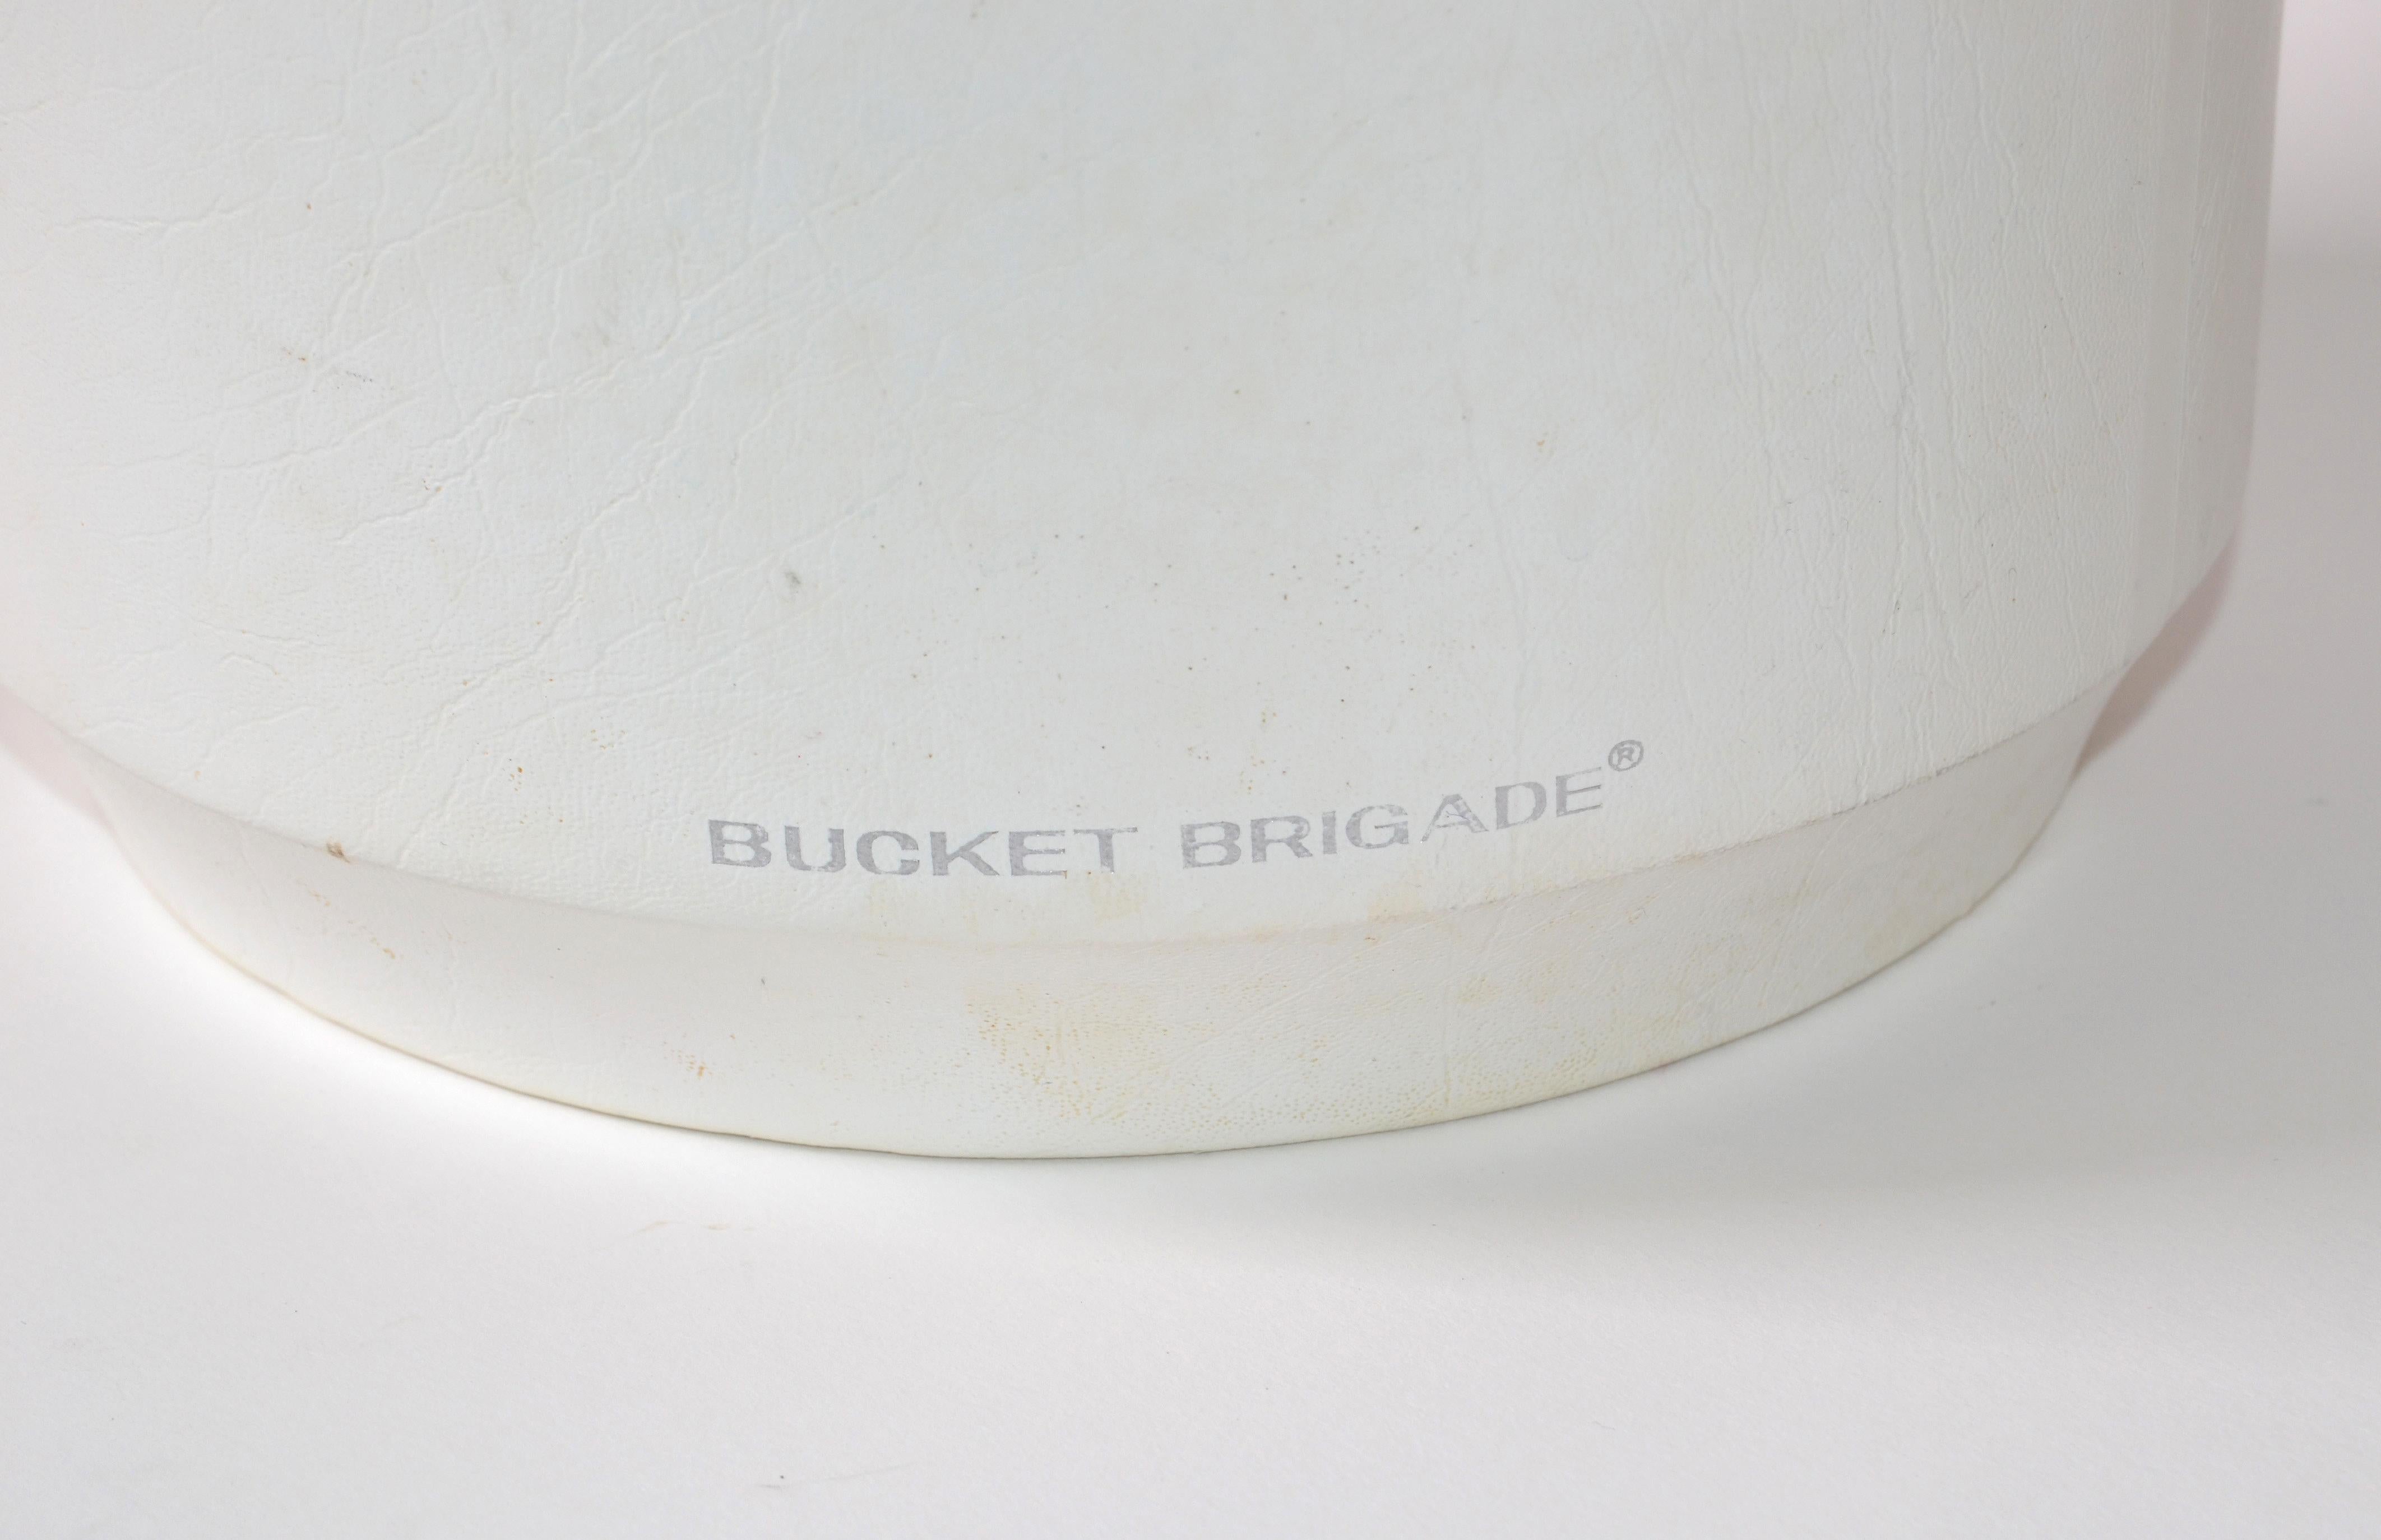 Bucket Brigade 1970 Mid-Century Modern White Leather & Lucite Lidded Ice Bucket For Sale 1